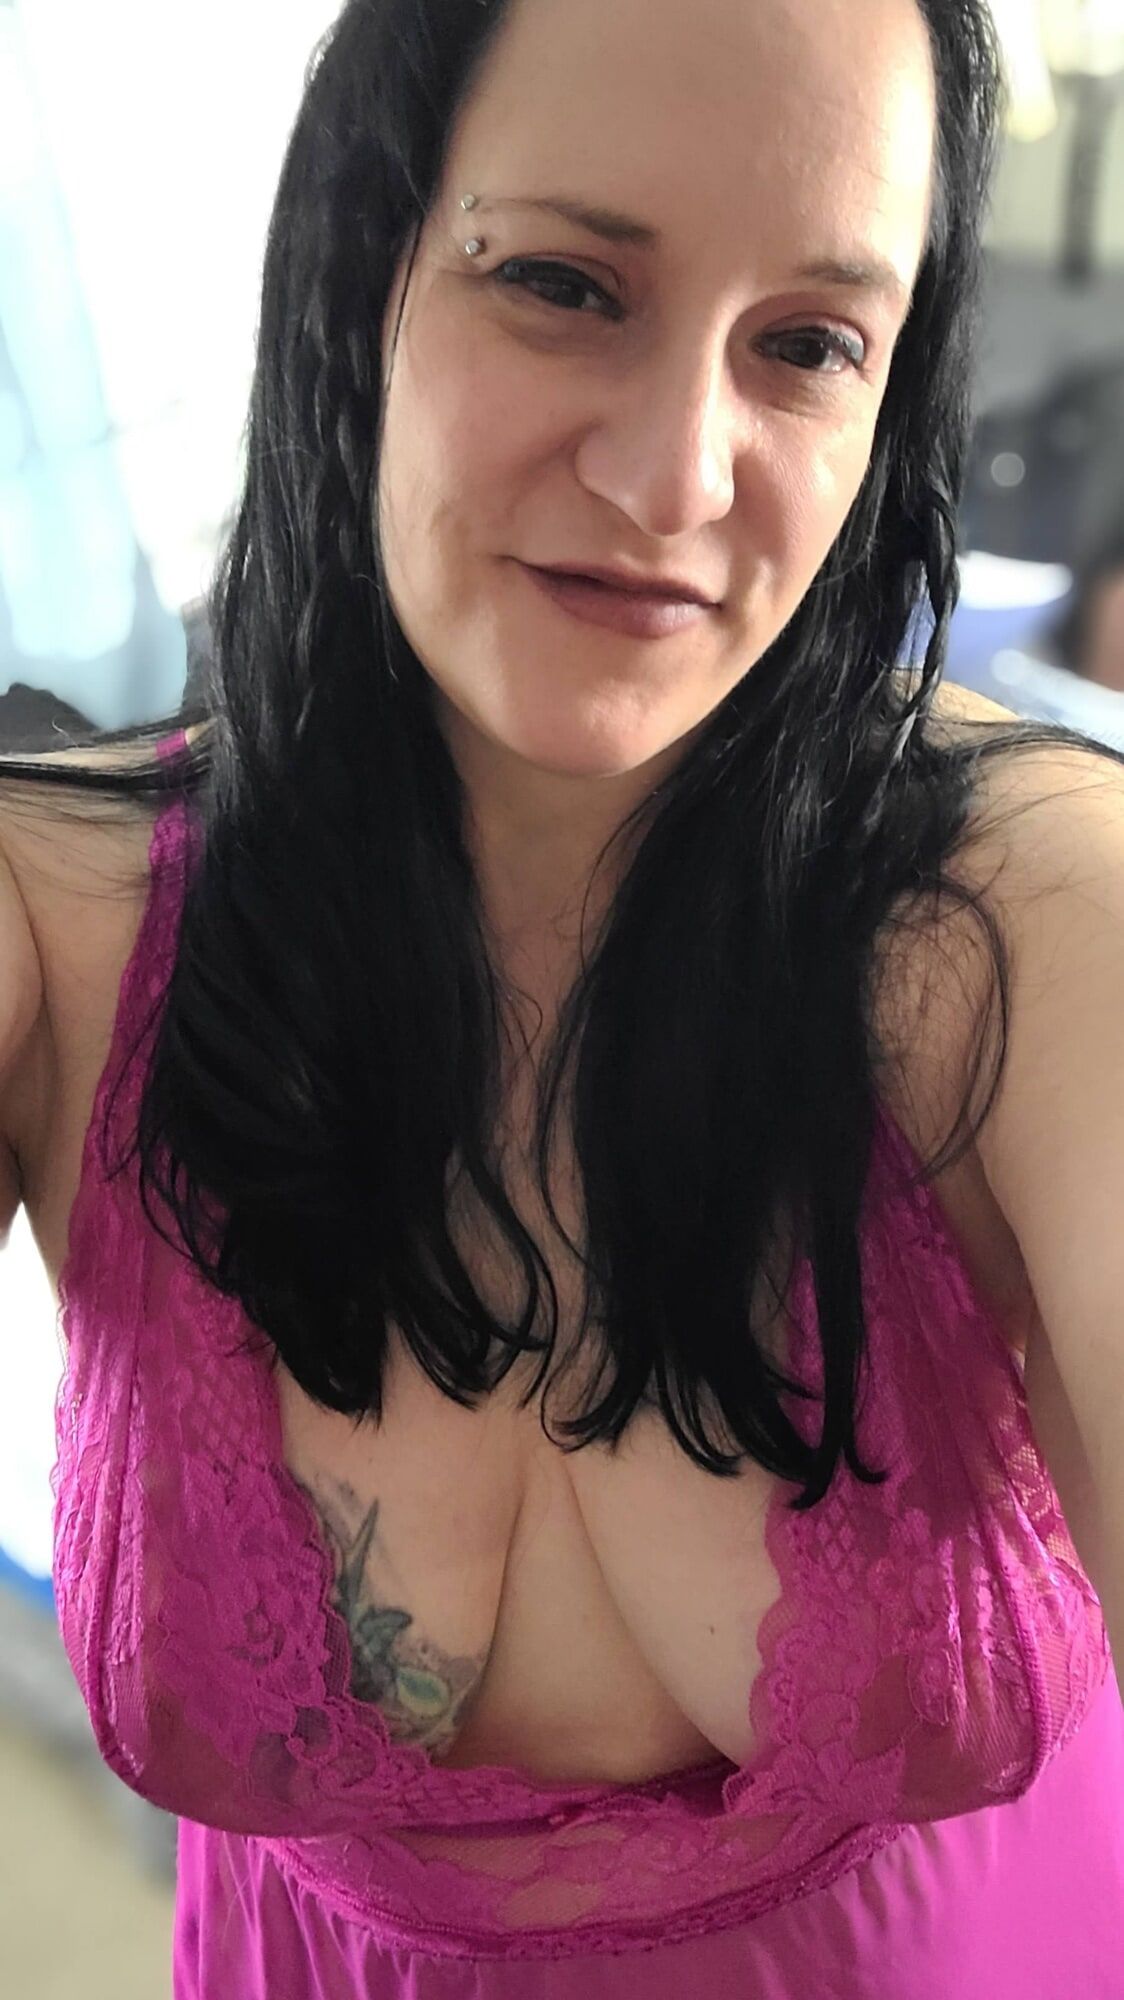 Want to see more titties? #3